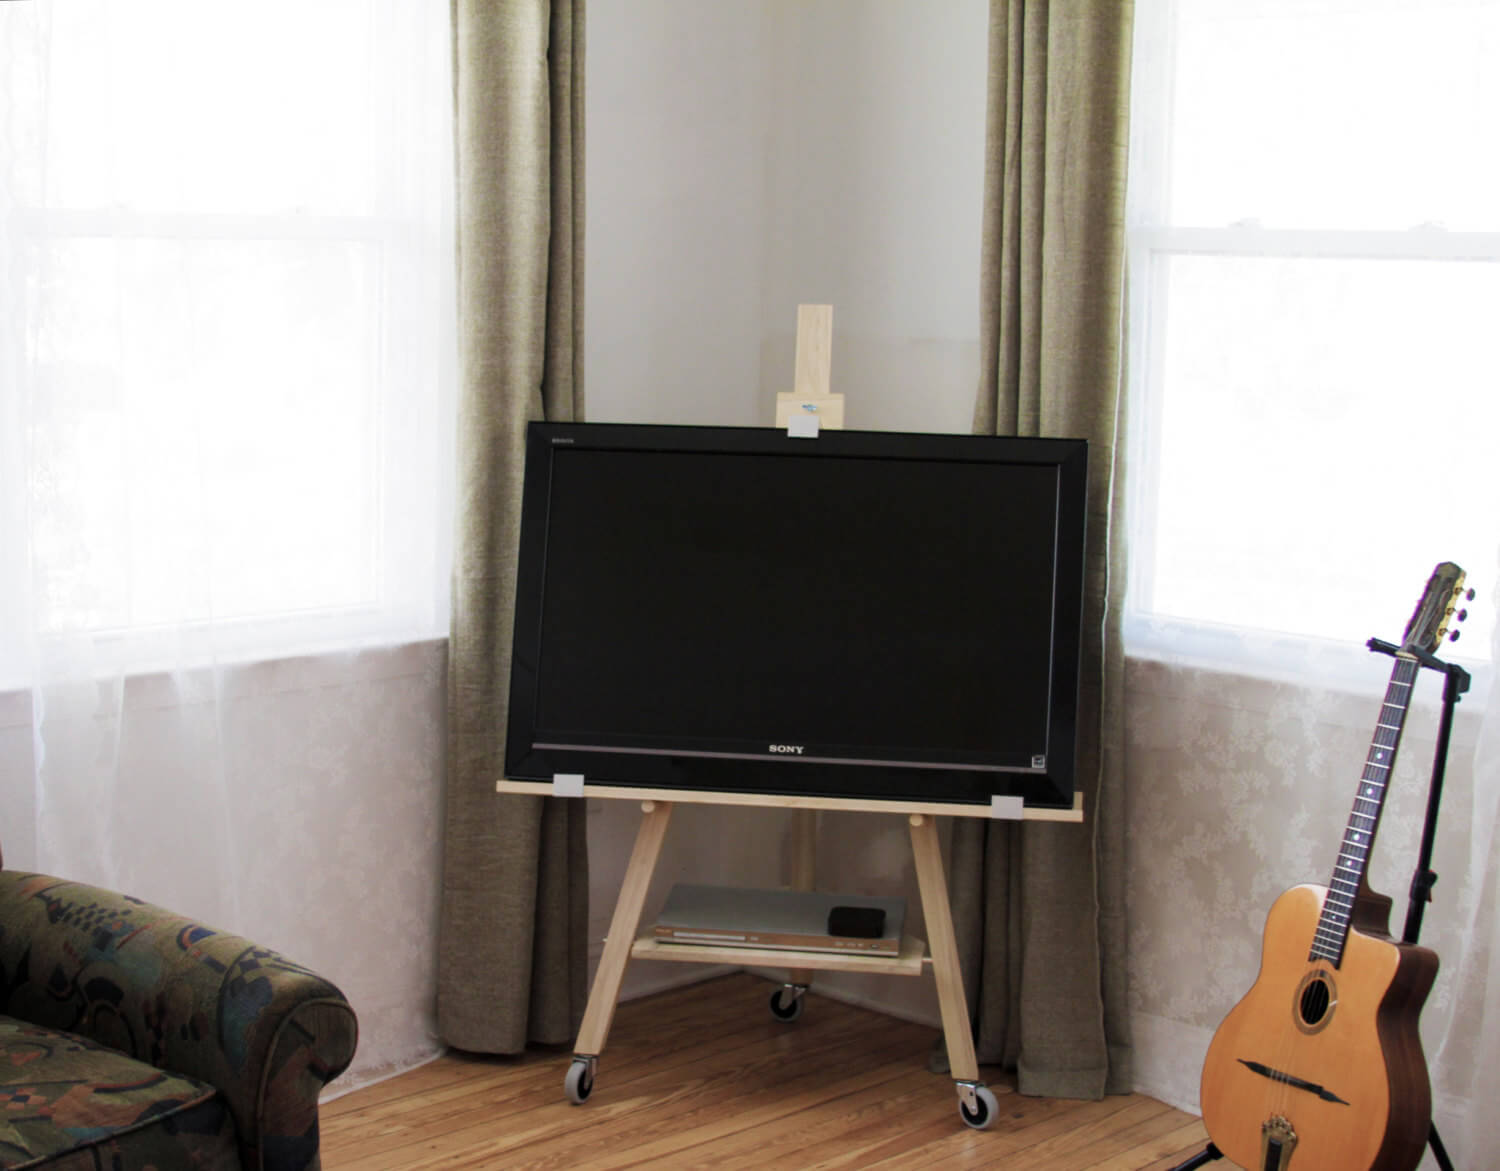 corner-easel-tv-stand-with-undershlef-for-home-furniture-idea-small-display-easel-stand-easel-picture-stand-floor-mirror-easel-stand-tripod-easel-stand-easel-tv-stand-standing-easels-tv-stand-easel-ea